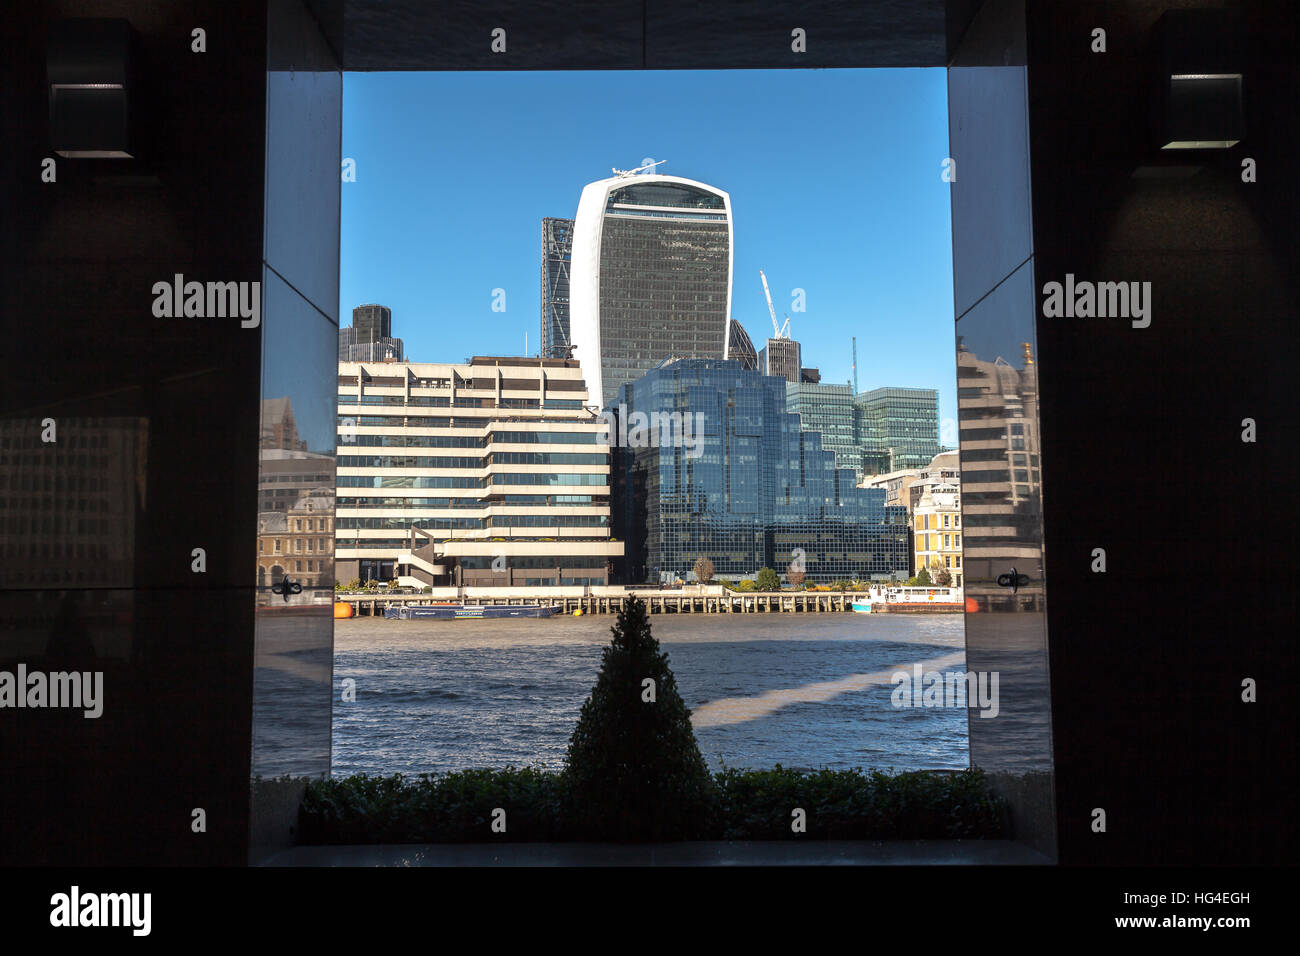 London Walkie-talkie Fenchurch  building framing through a square window Stock Photo